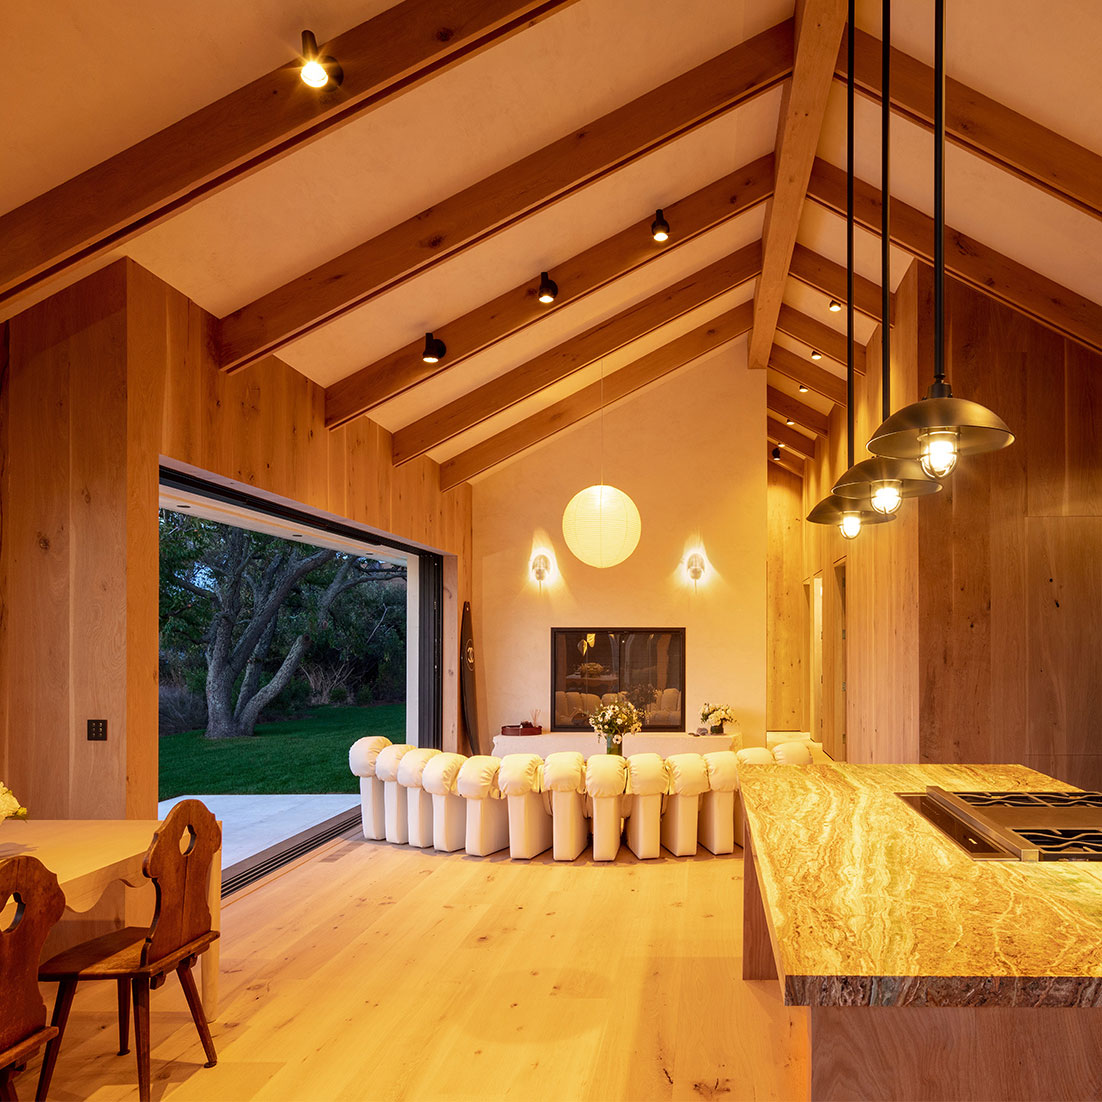 A barn house showing ambient lighting layer through natural daylight and task lighting layer with pendants